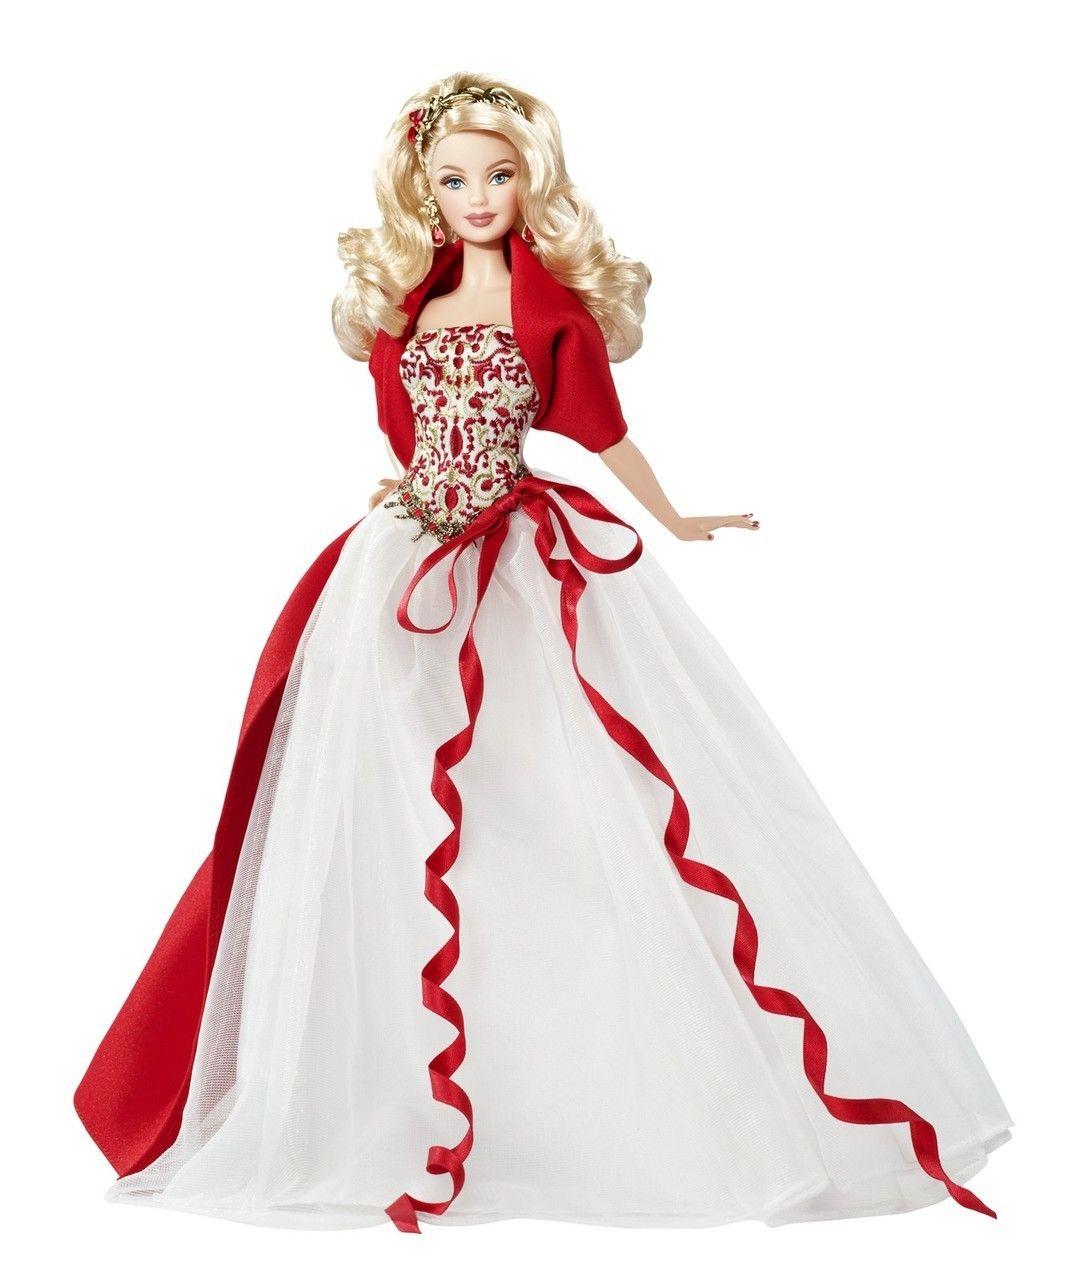 Barbie Doll With Long Gown Wallpaper